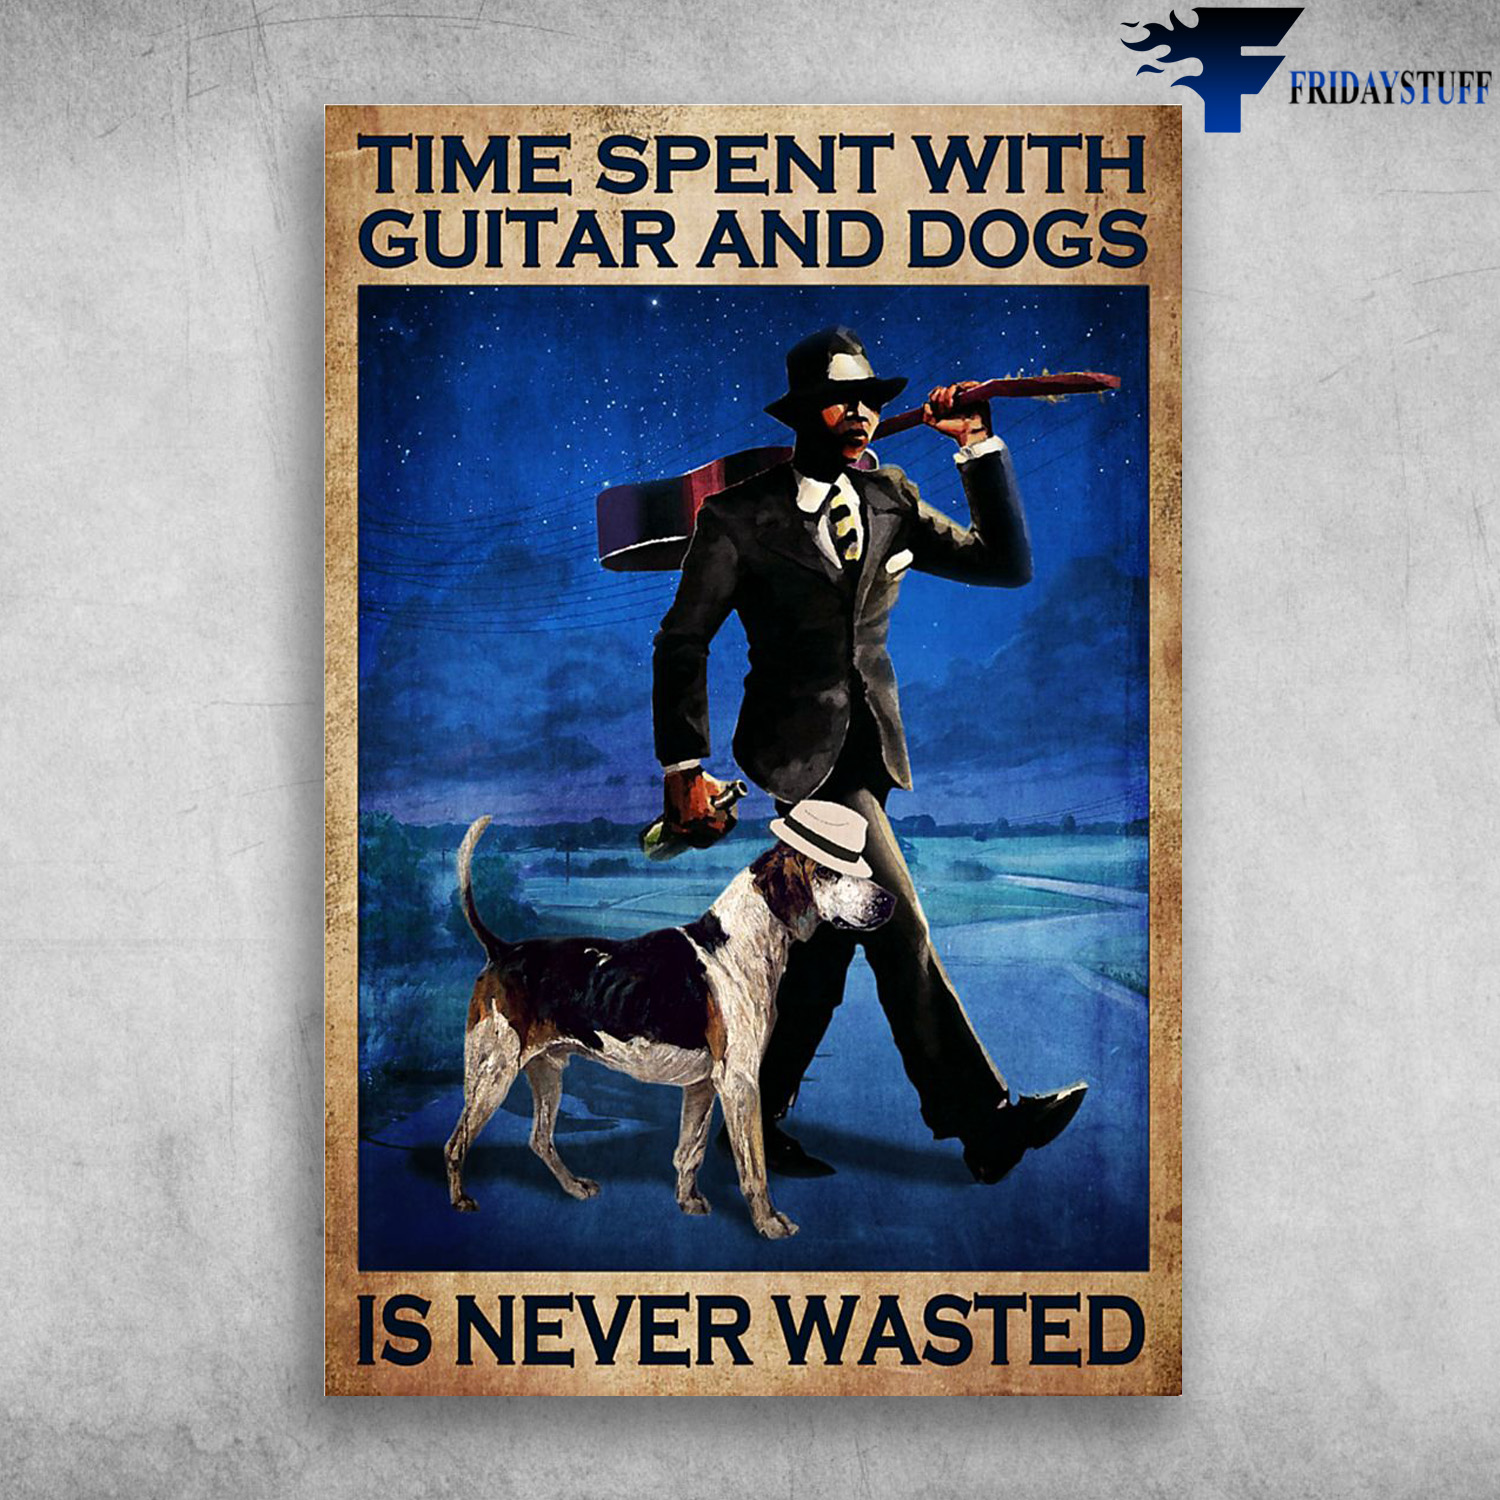 Guitar Man And The Dog - Time Spent With Guitar And Dogs, Is Never Wasted